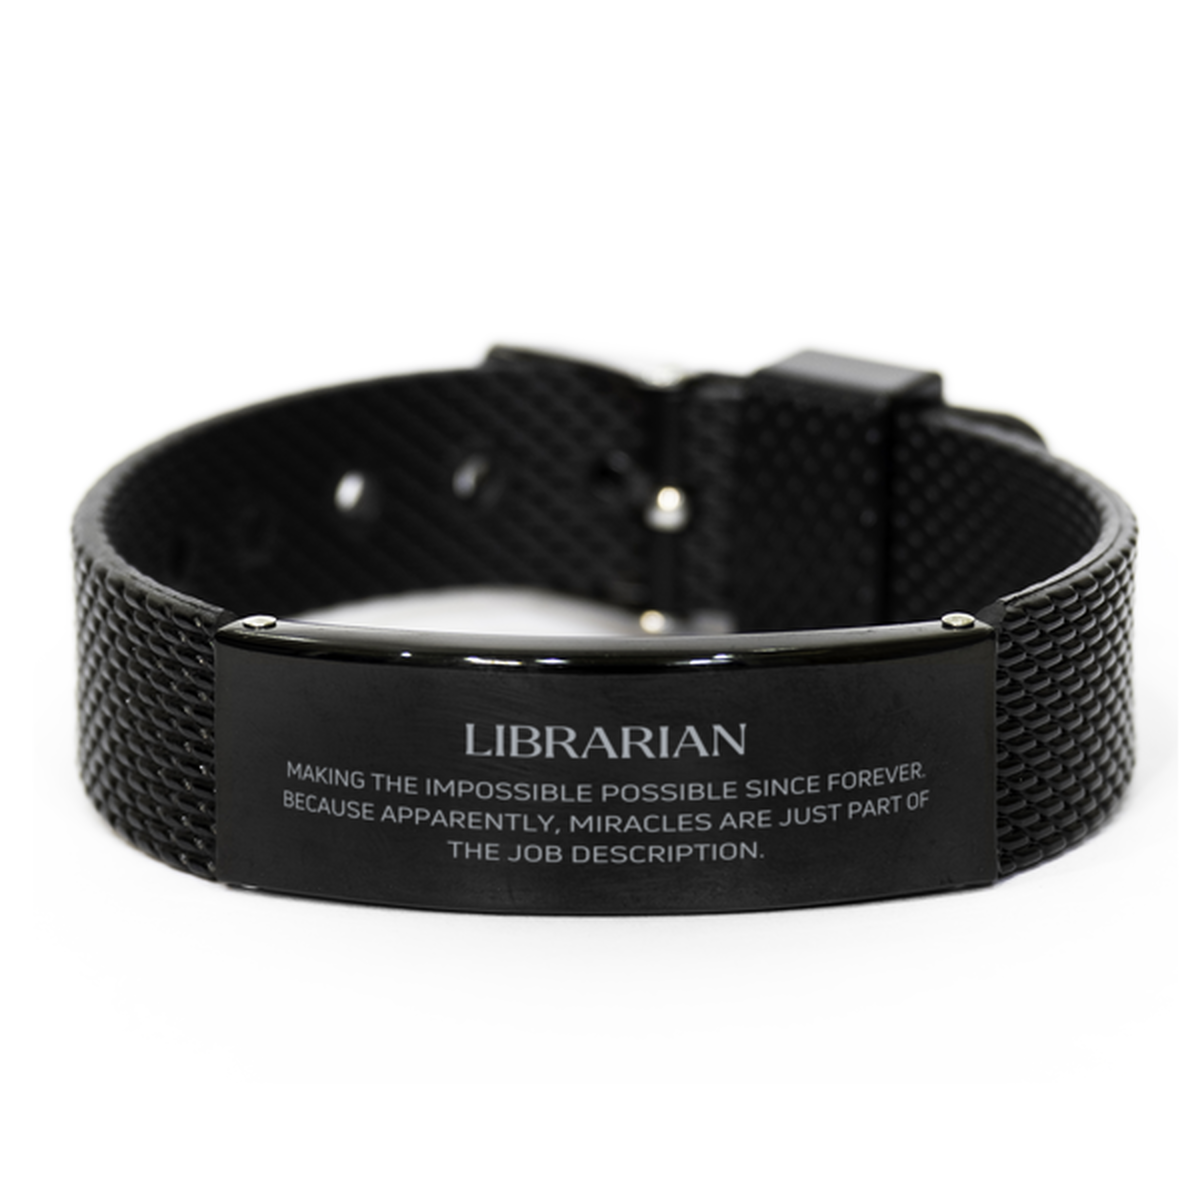 Funny Librarian Gifts, Miracles are just part of the job description, Inspirational Birthday Black Shark Mesh Bracelet For Librarian, Men, Women, Coworkers, Friends, Boss